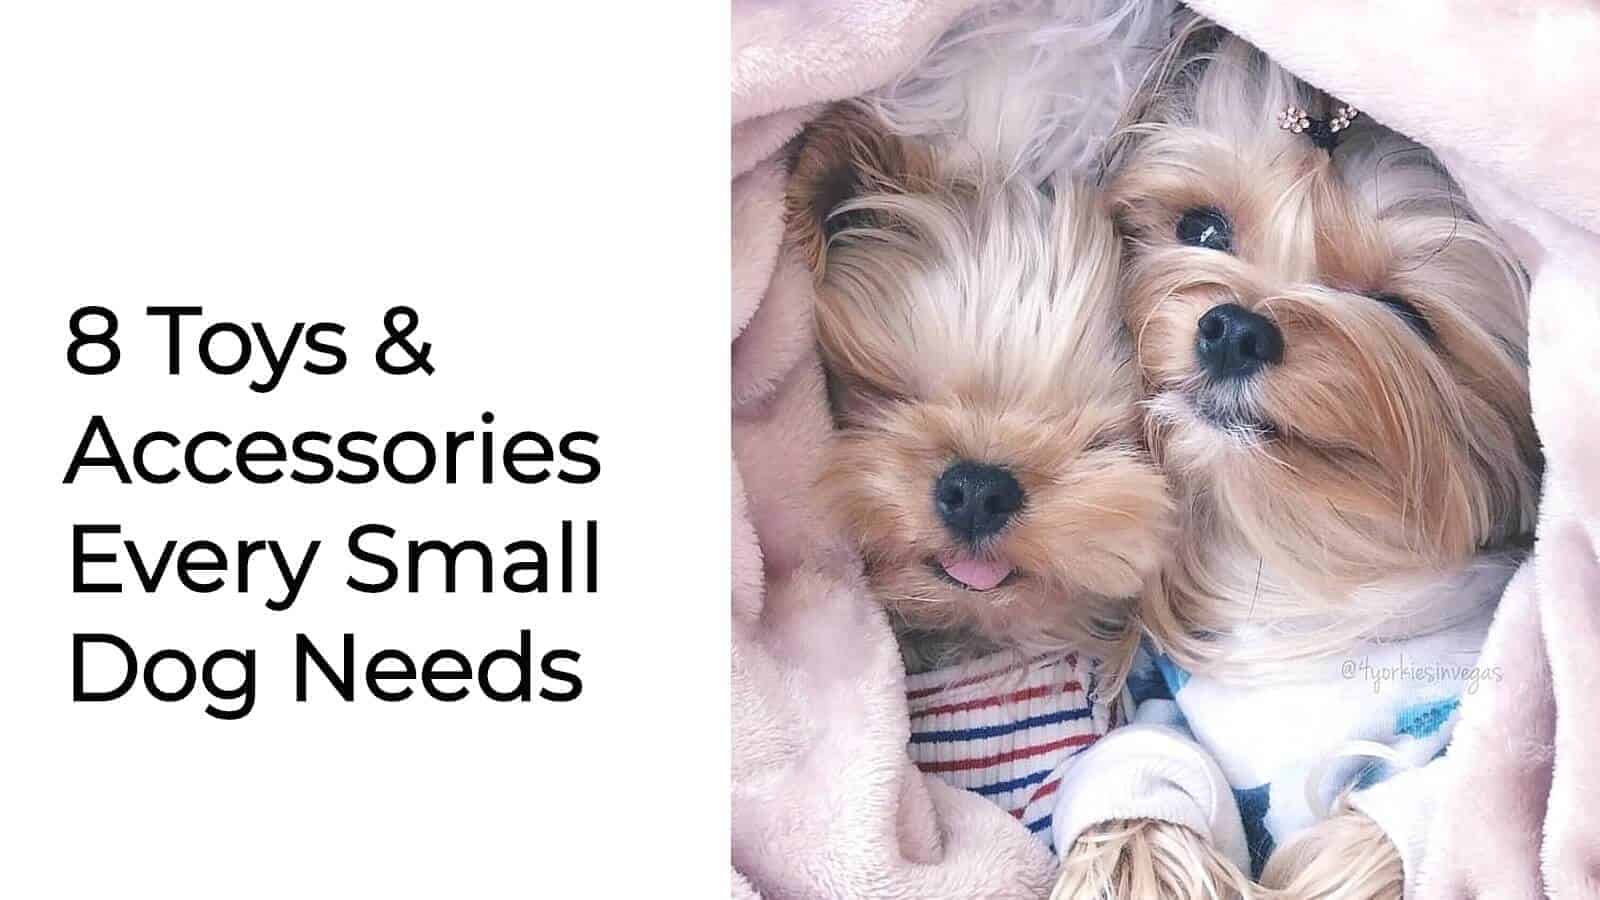 8 Toys & Accessories Every Small Dog Needs • 8 Toys & Accessories